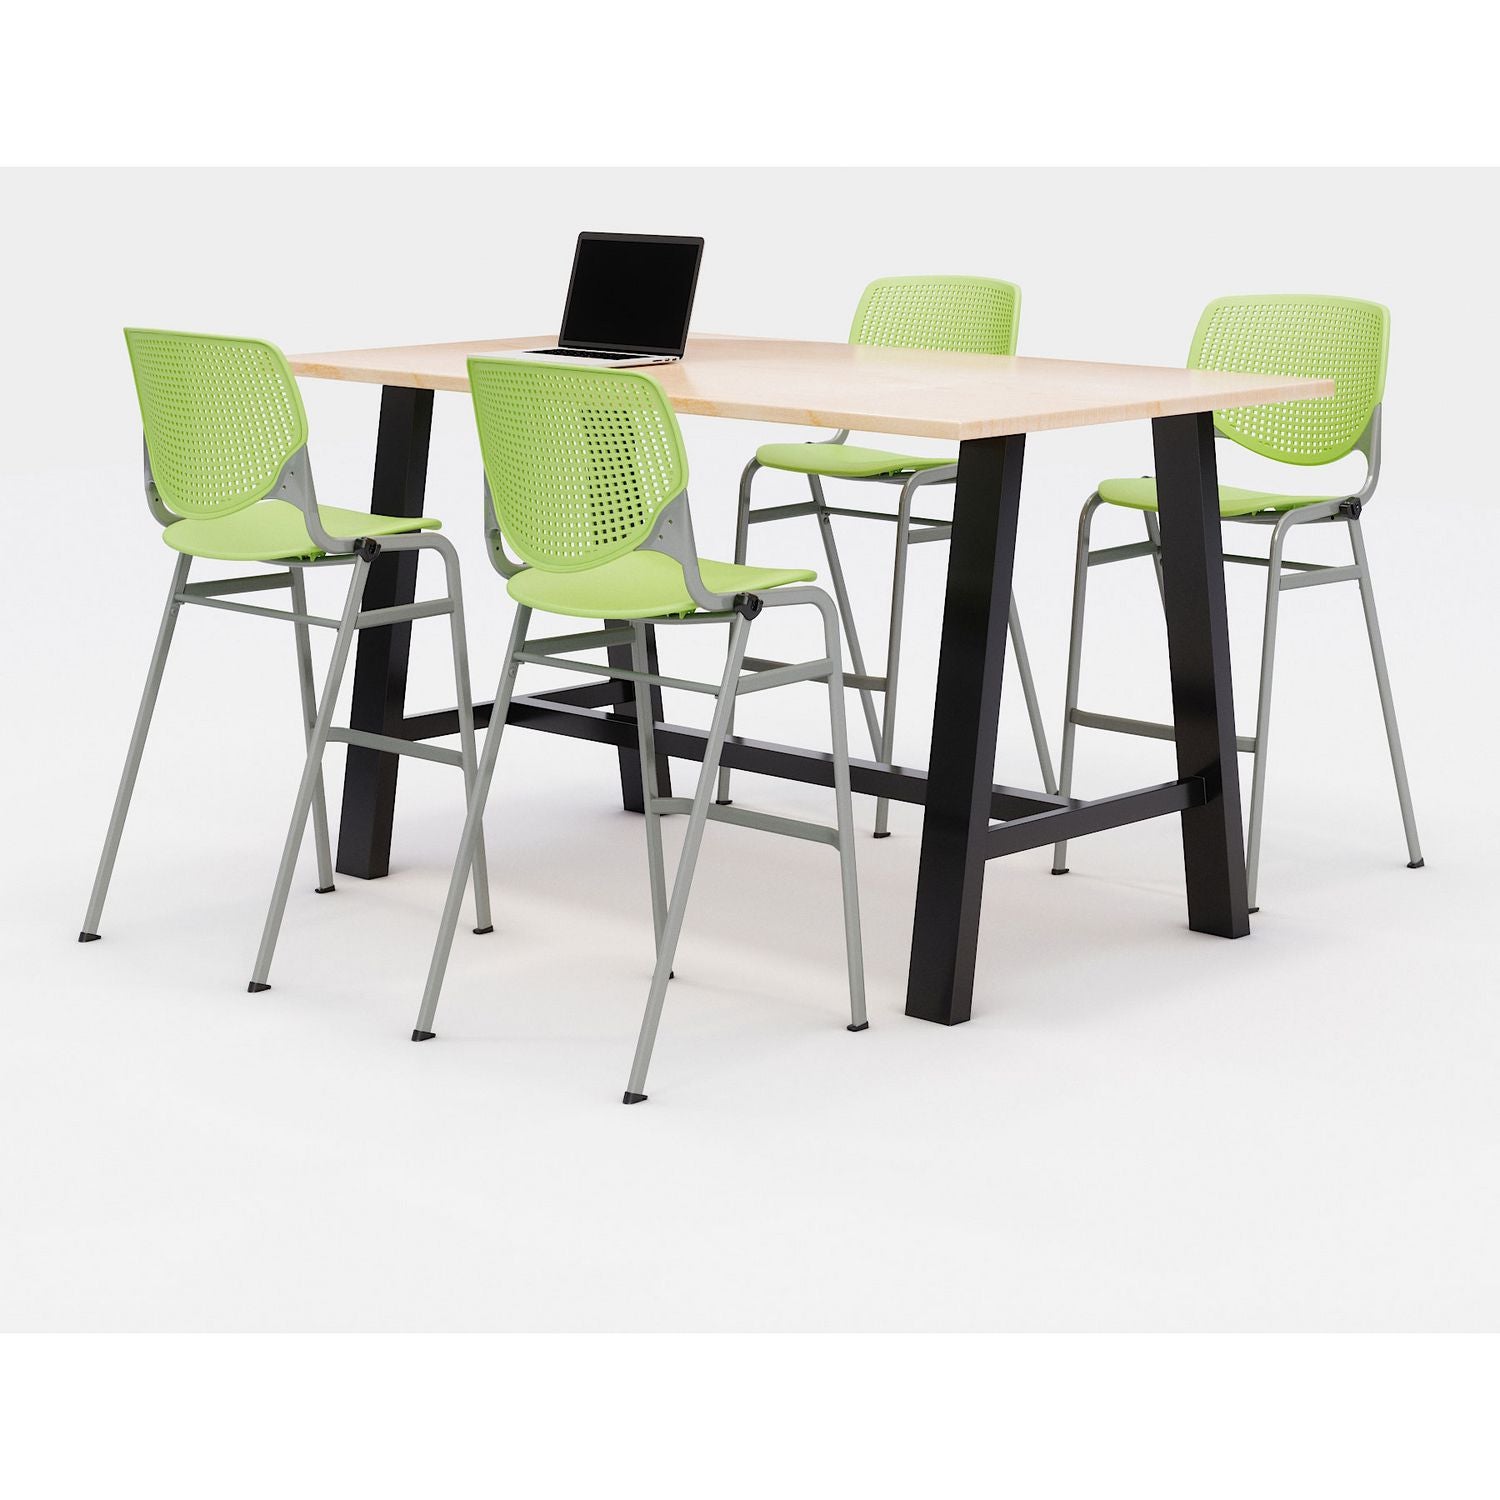 midtown-bistro-dining-table-with-four-lime-green-kool-barstools-36-x-72-x-41-kensington-maple-ships-in-4-6-business-days_kfi840031900791 - 1